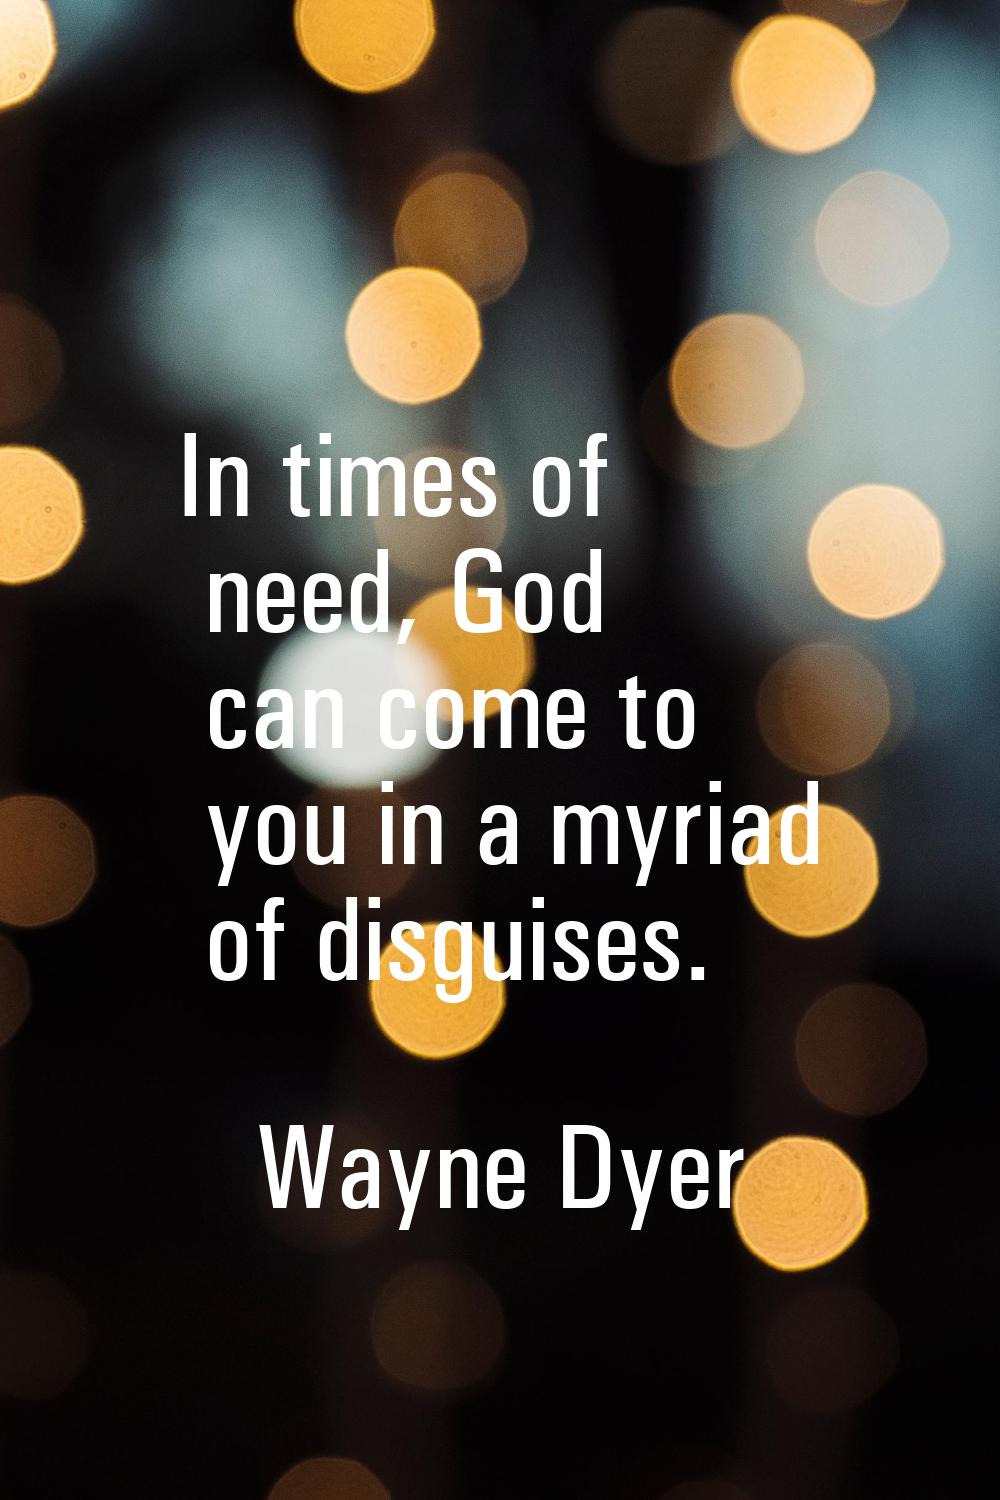 In times of need, God can come to you in a myriad of disguises.